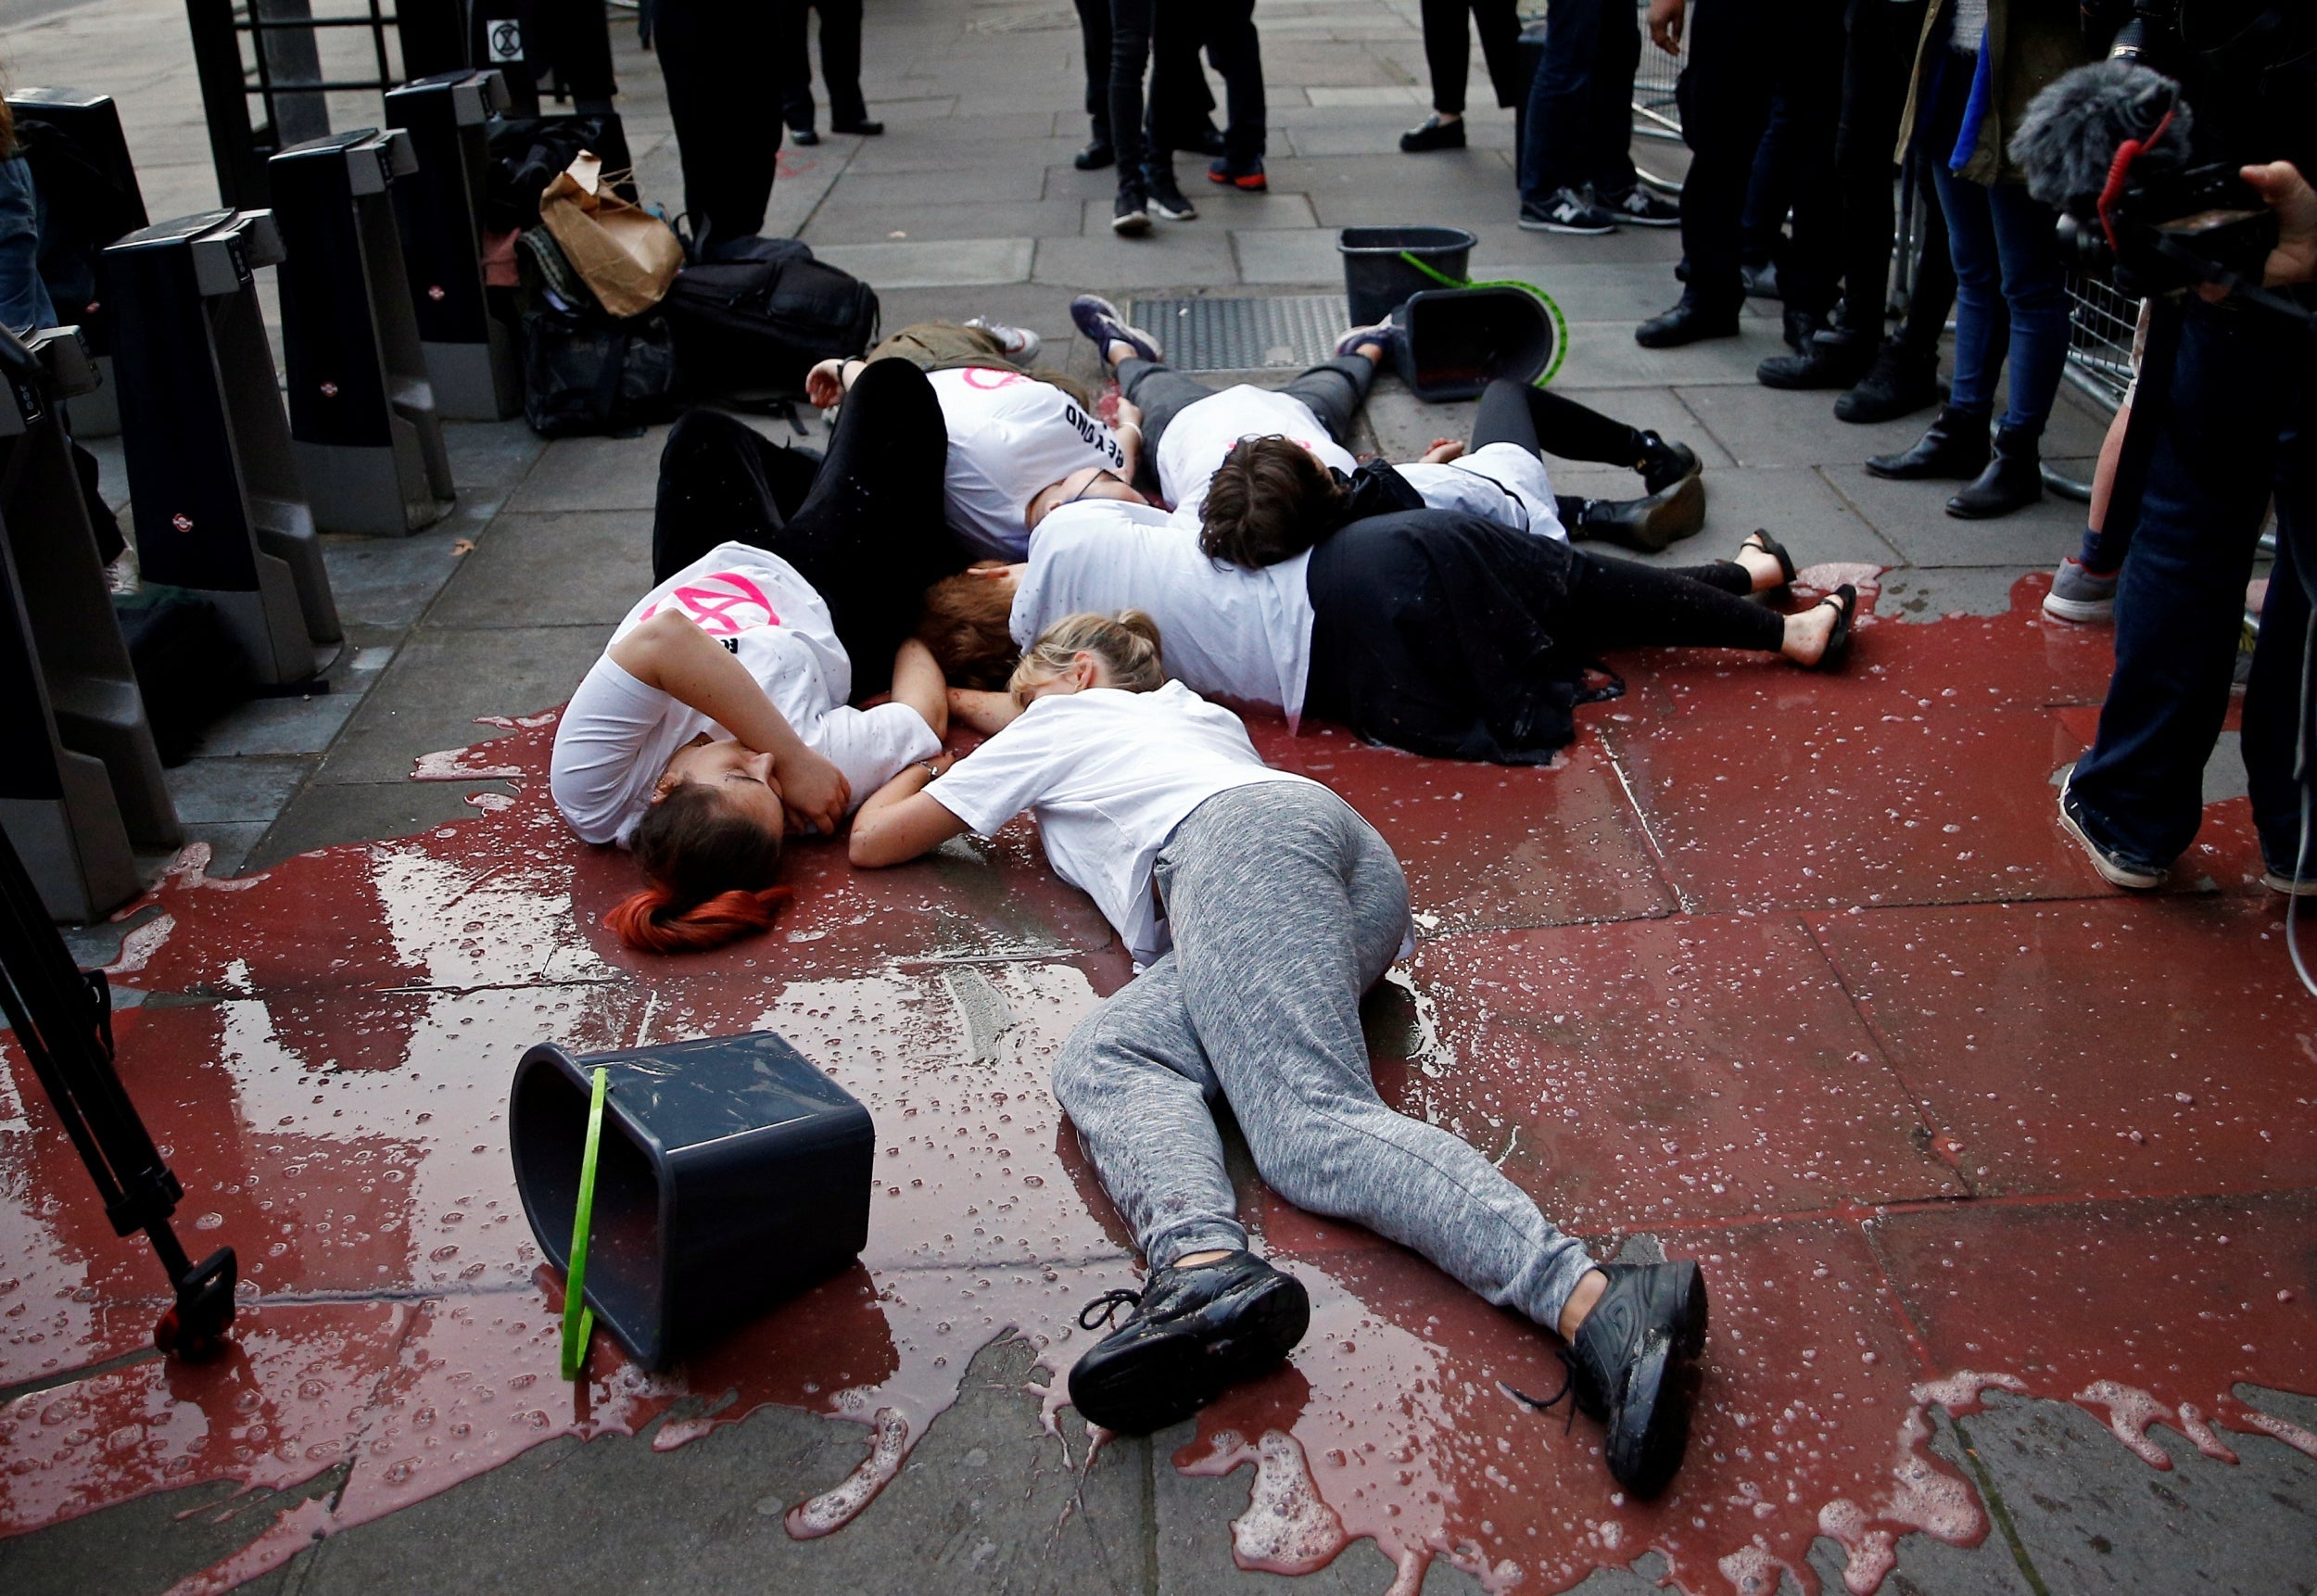 Extinction Rebellion protestors lie in fake blood outside one of the event’s venues (Reuters)